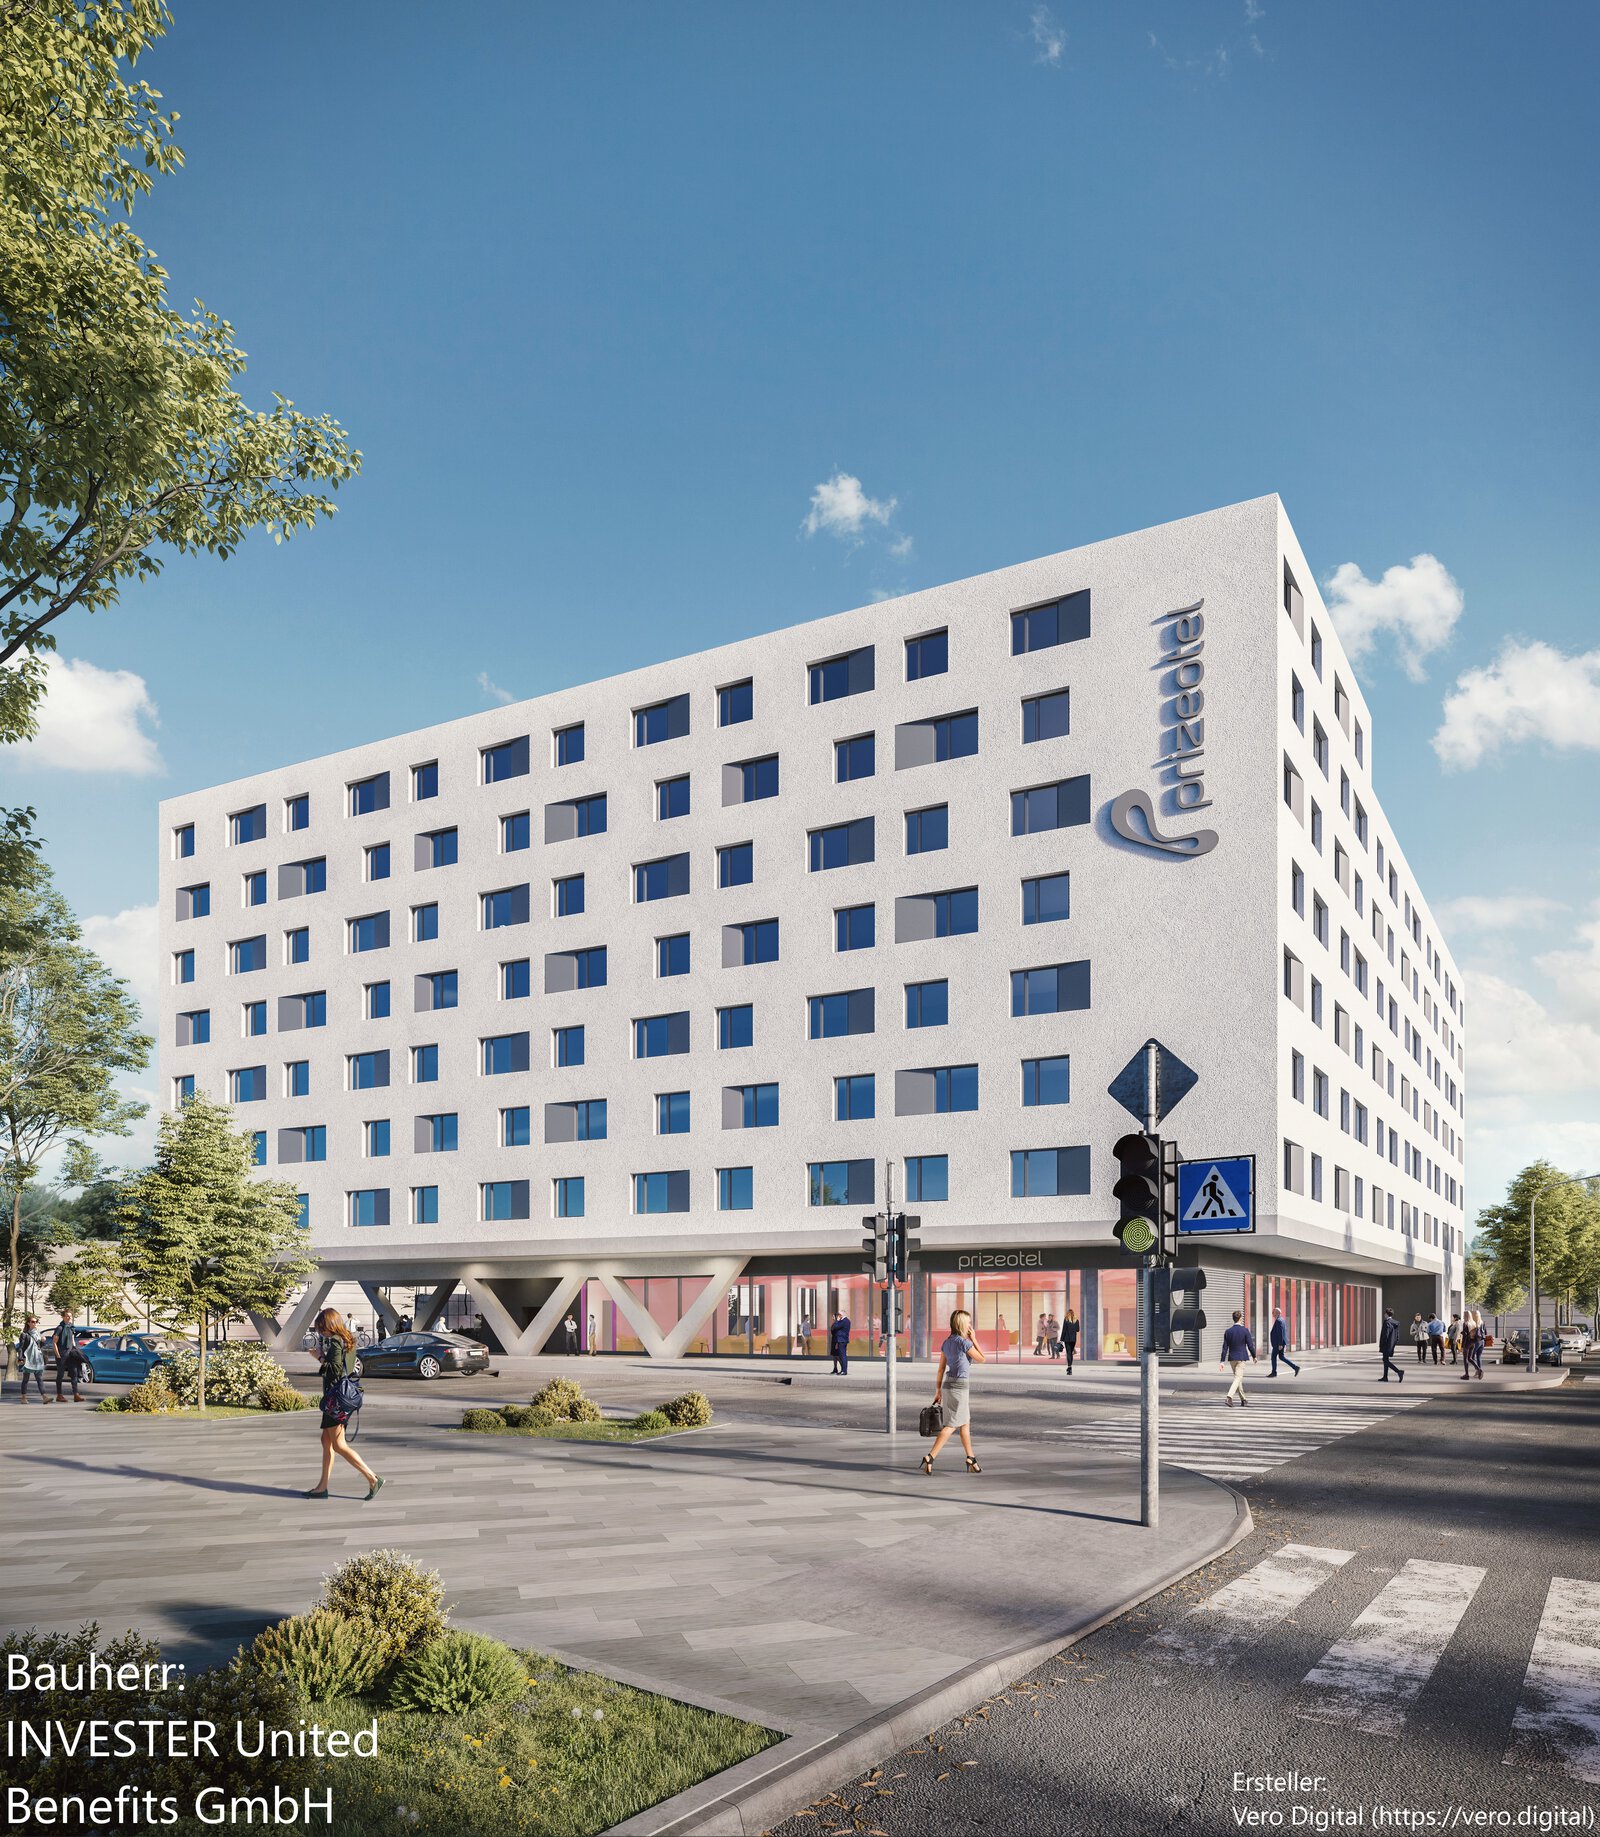  Visualization of the Prizeotel project